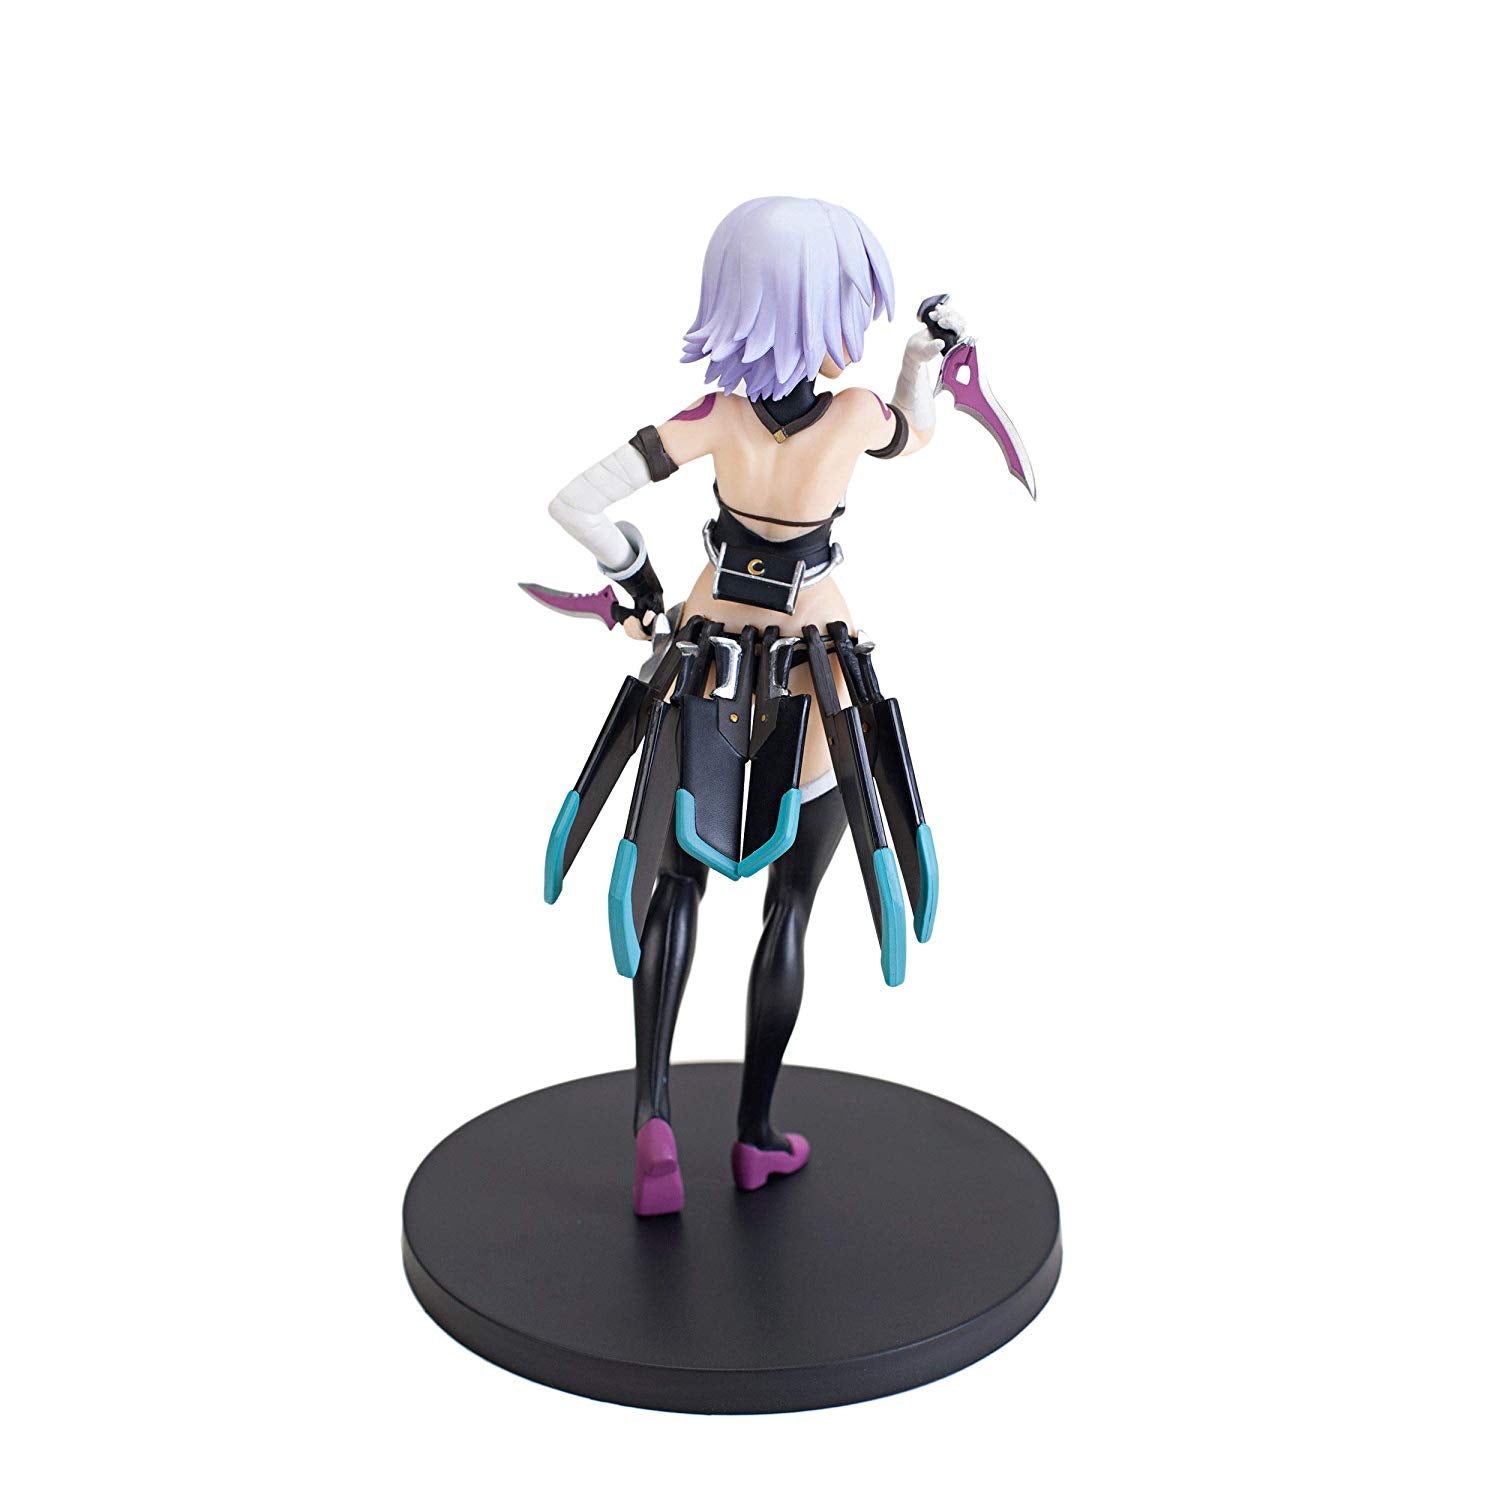 Taito Fate Apocrypha Assassin of Black Jack the Ripper Figure - Super Anime Store FREE SHIPPING FAST SHIPPING USA